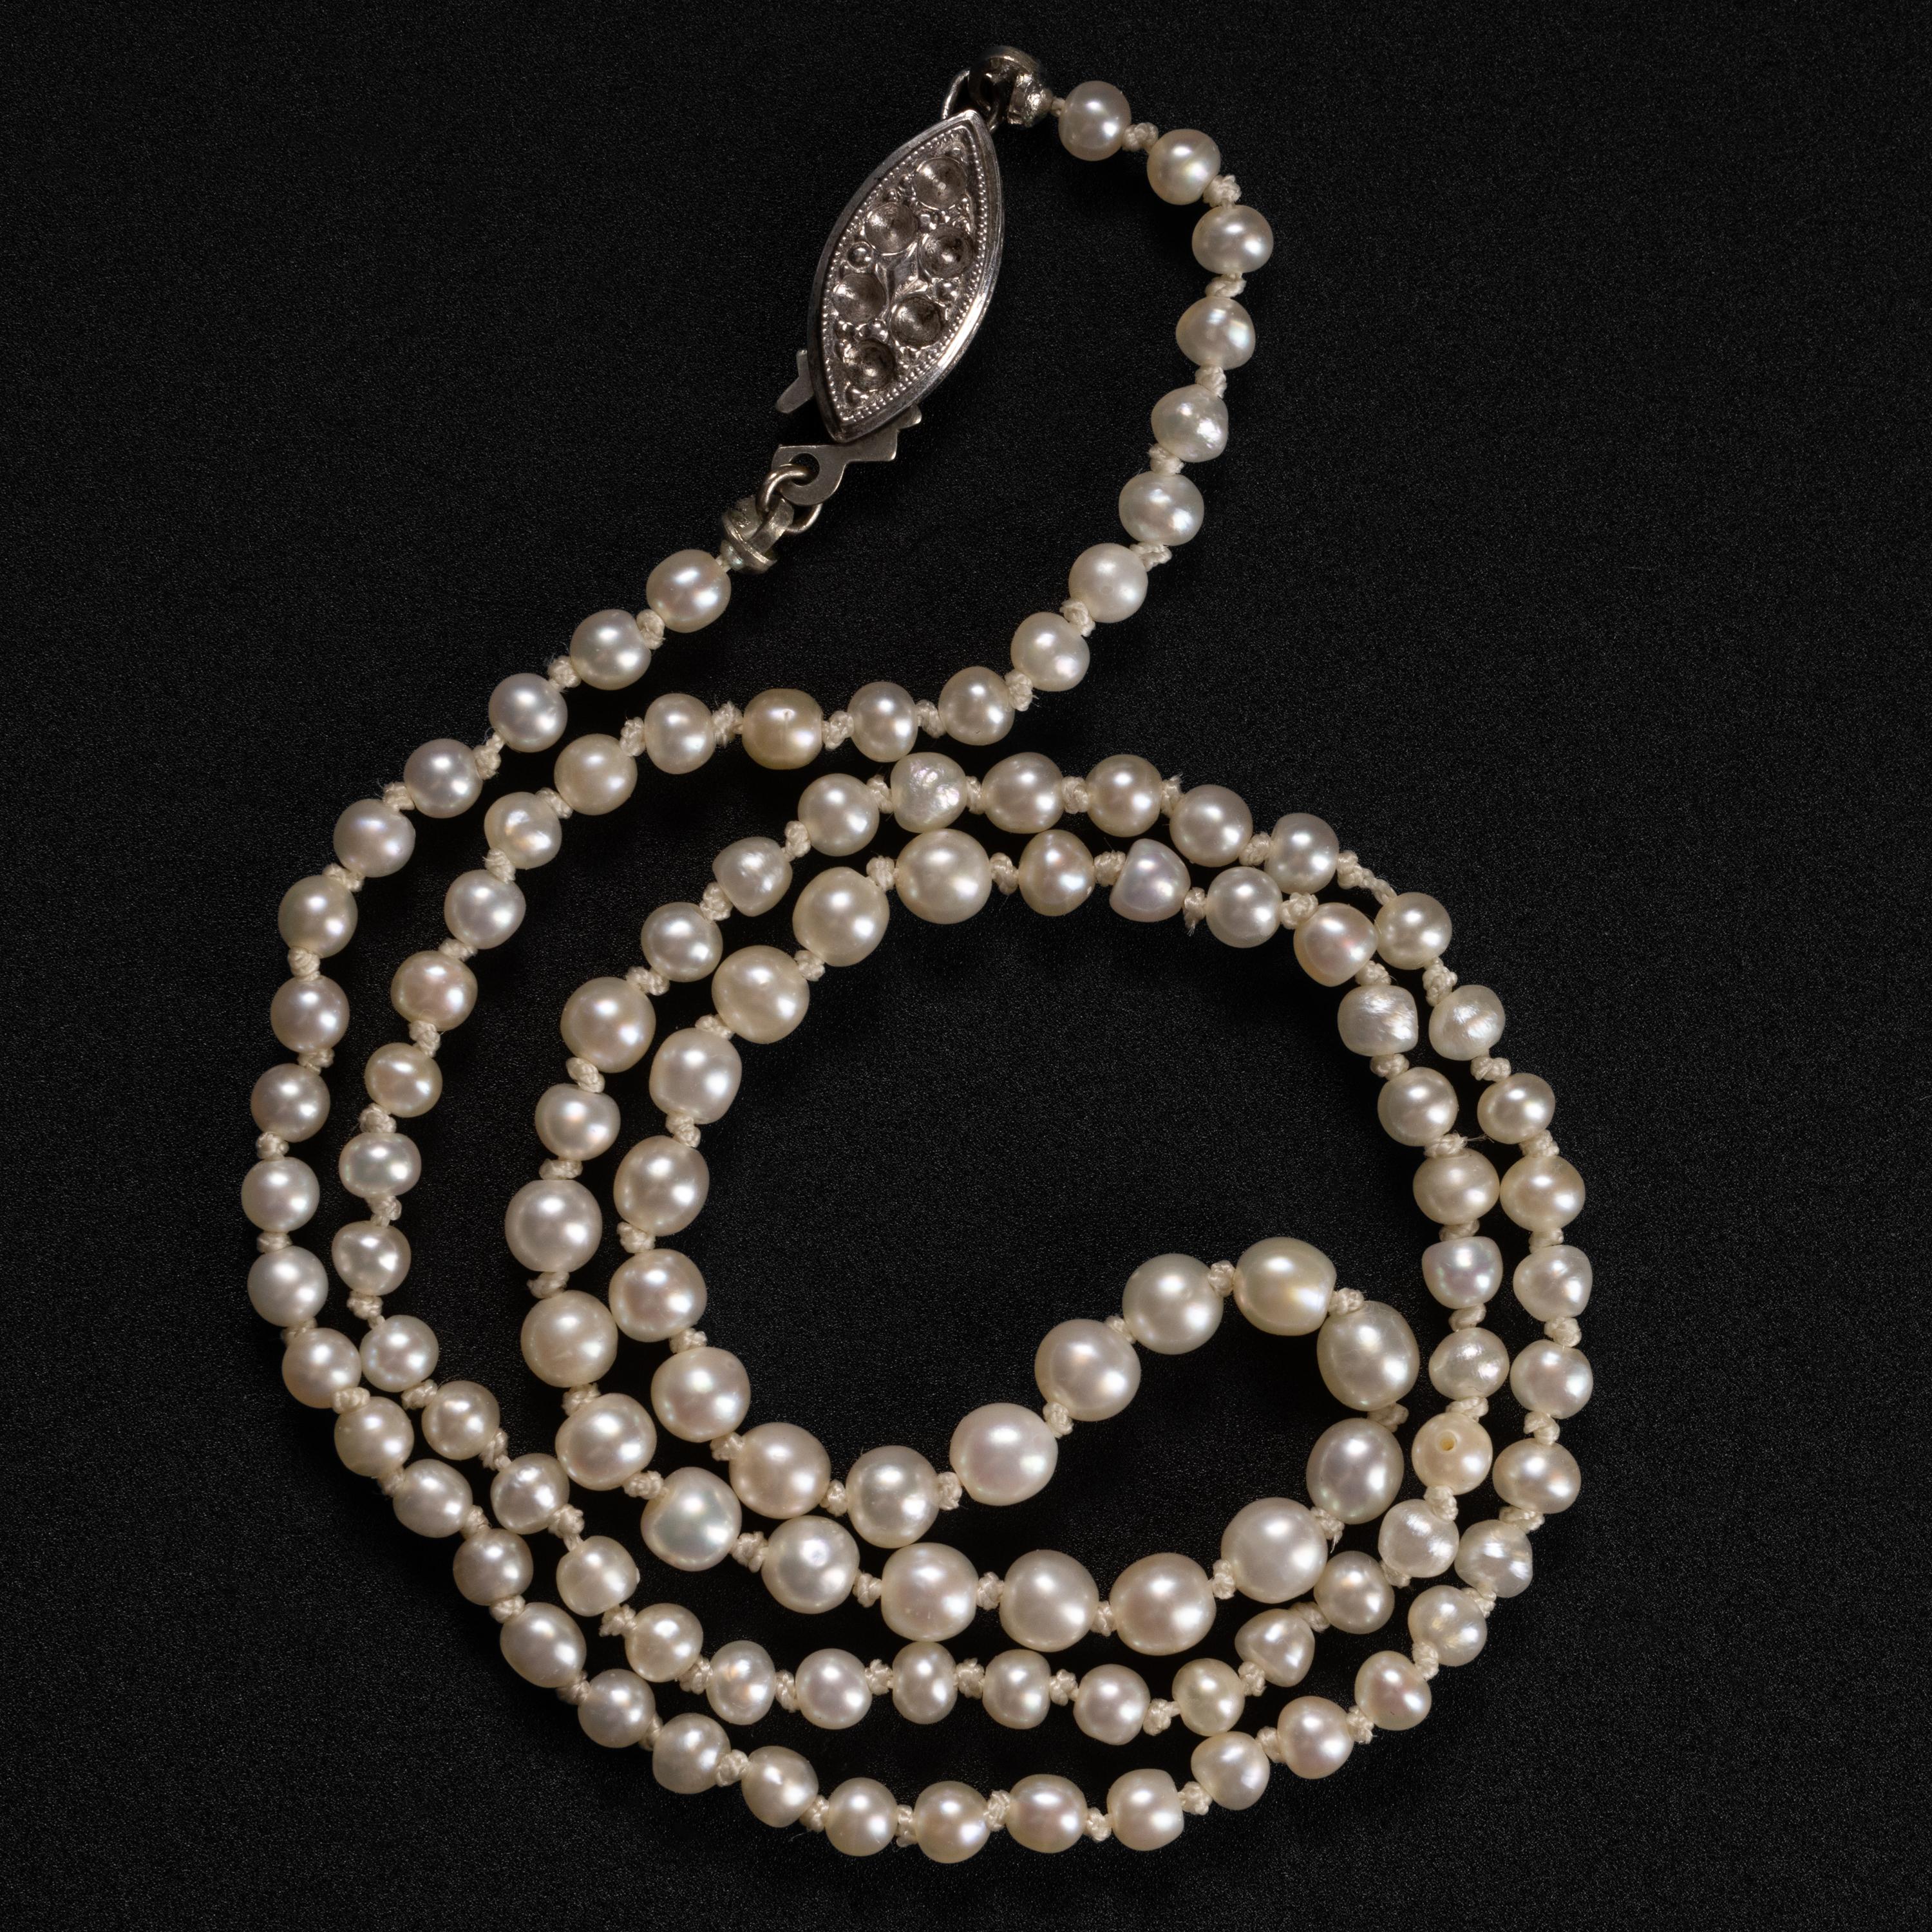 Bead GIA Certified Natural Saltwater Pearl Necklace for a Child